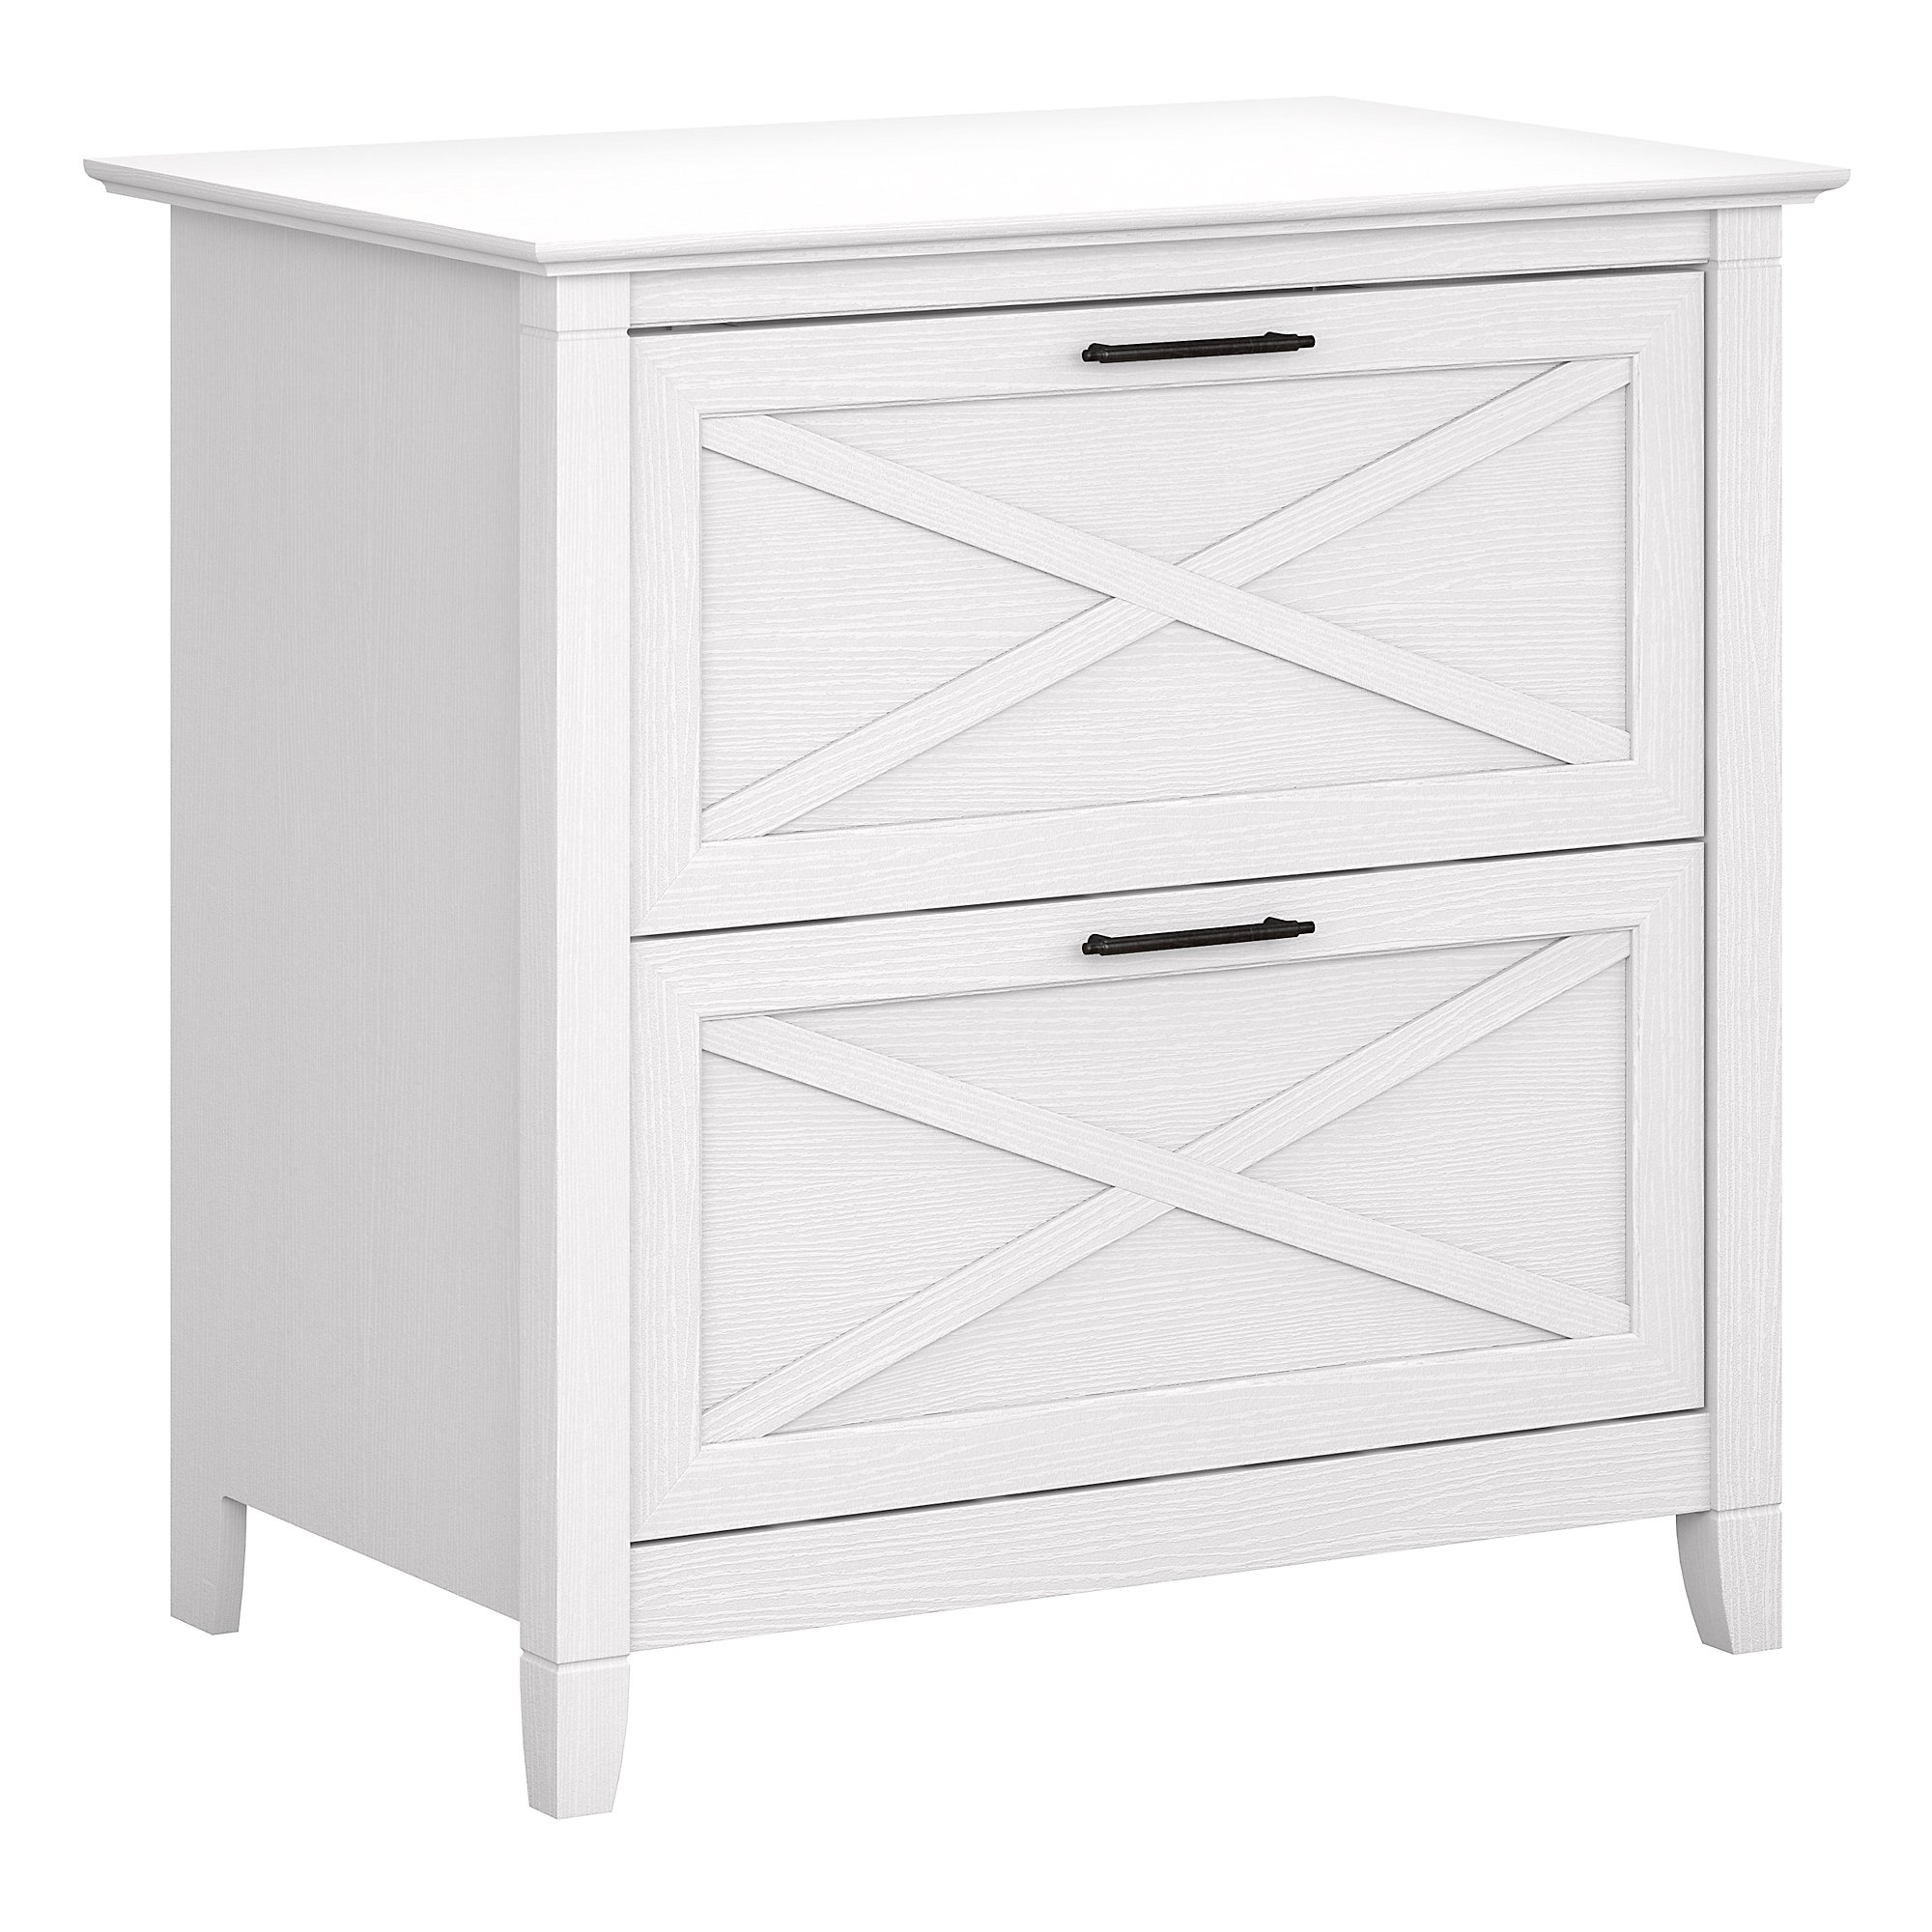 Bush Furniture Key West Lateral File Cabinet, 2 Drawer, Pure White Oak - image 1 of 8